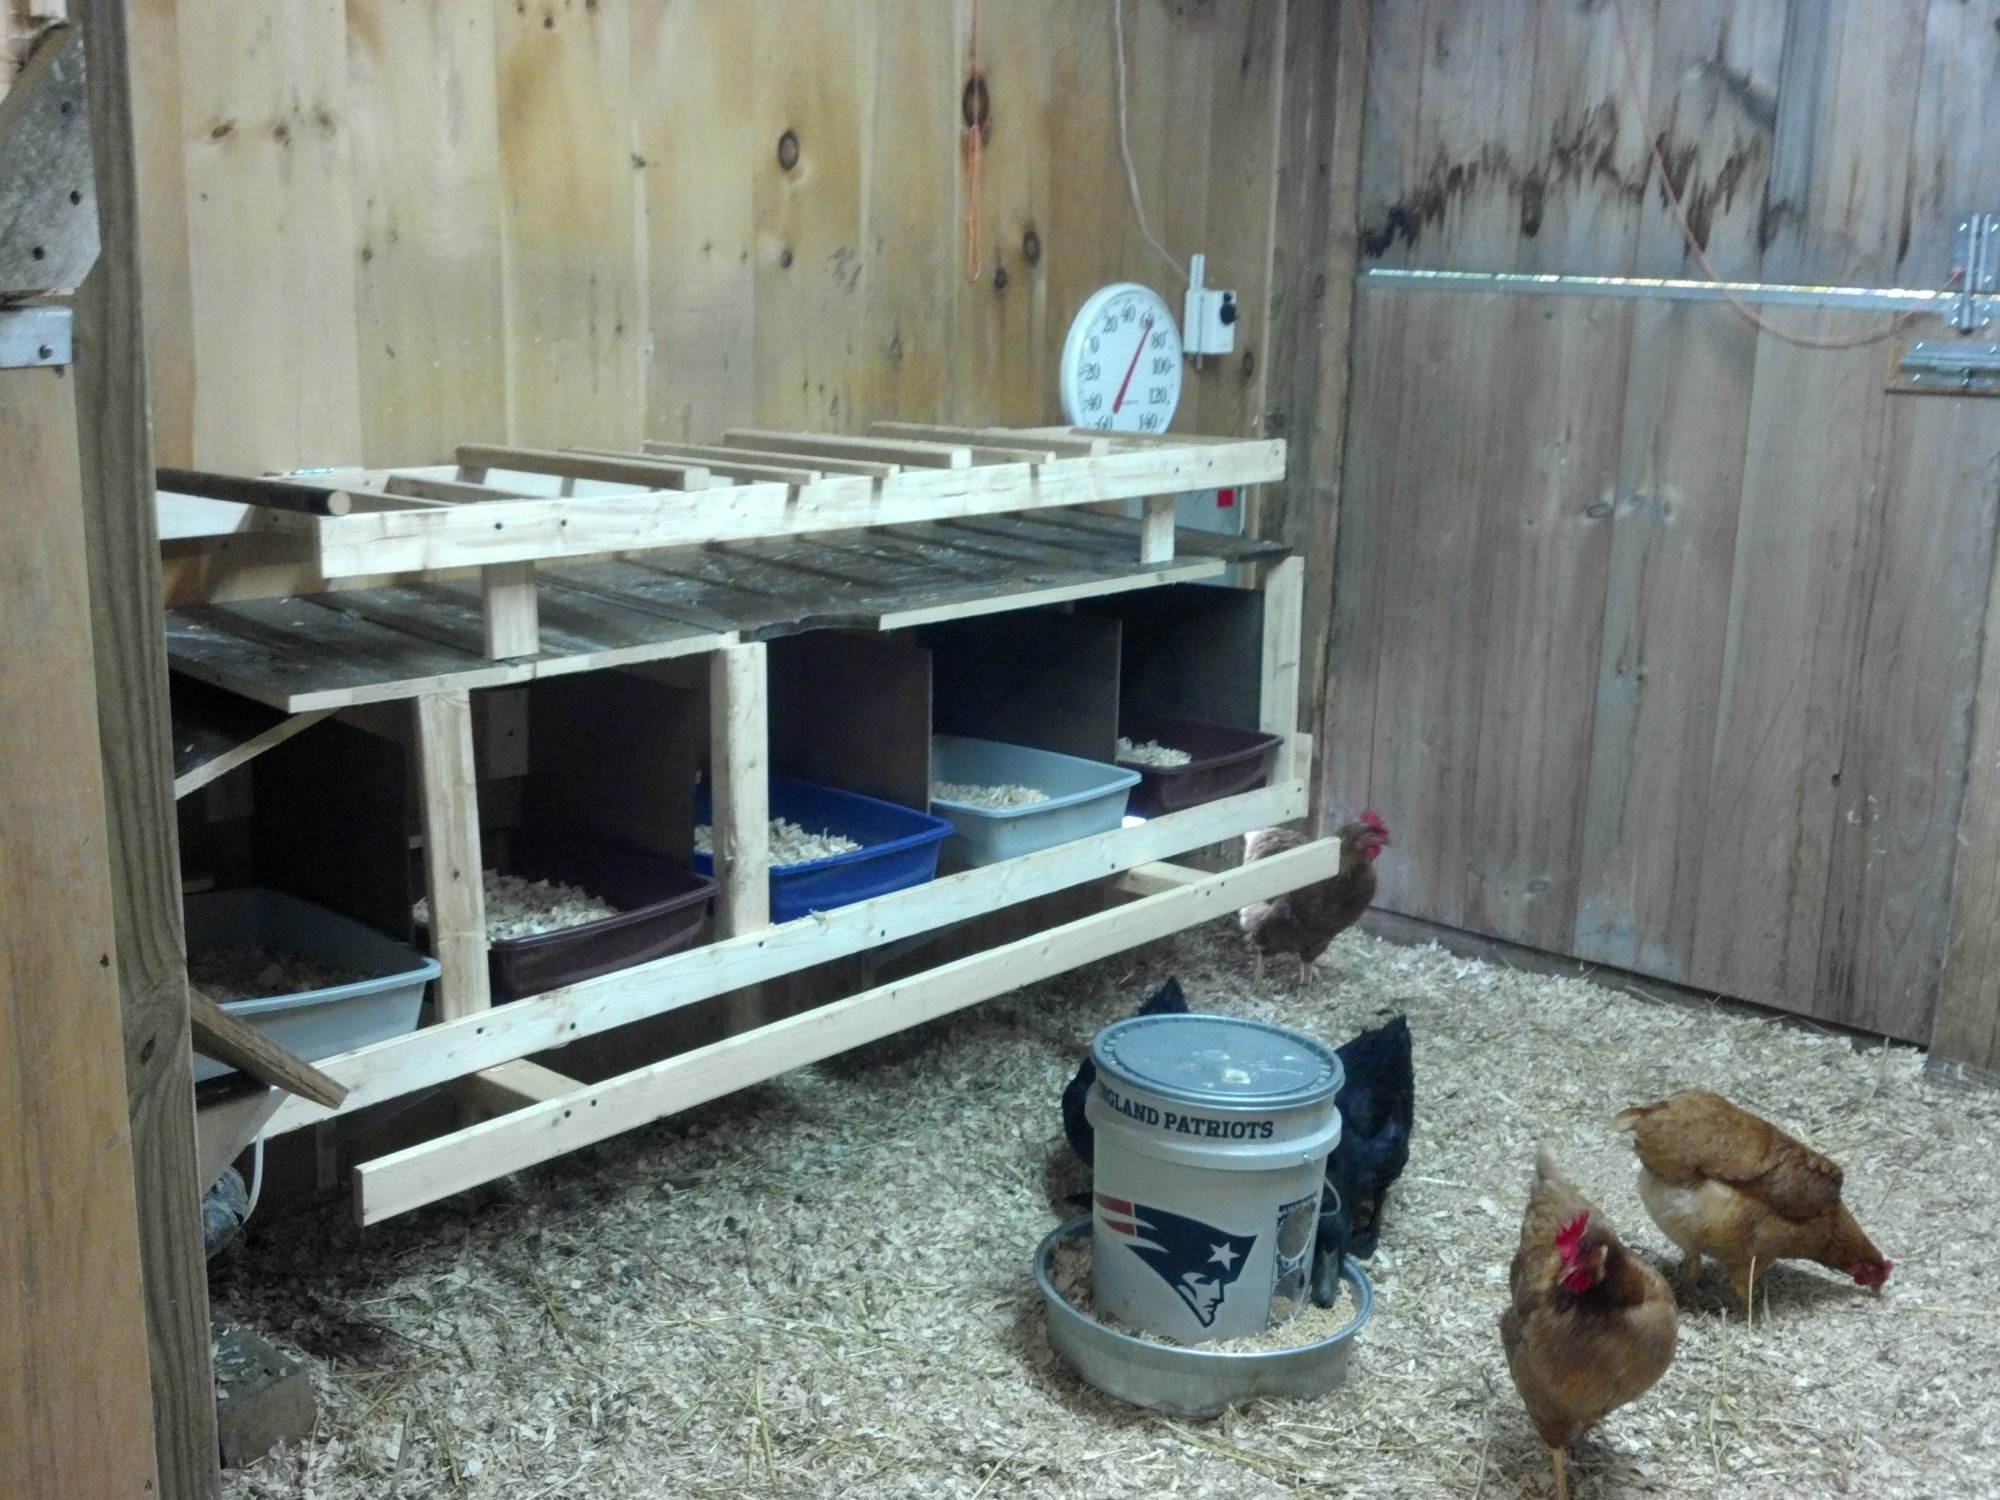  coop, good ideas for any coop - BackYard Chickens Community